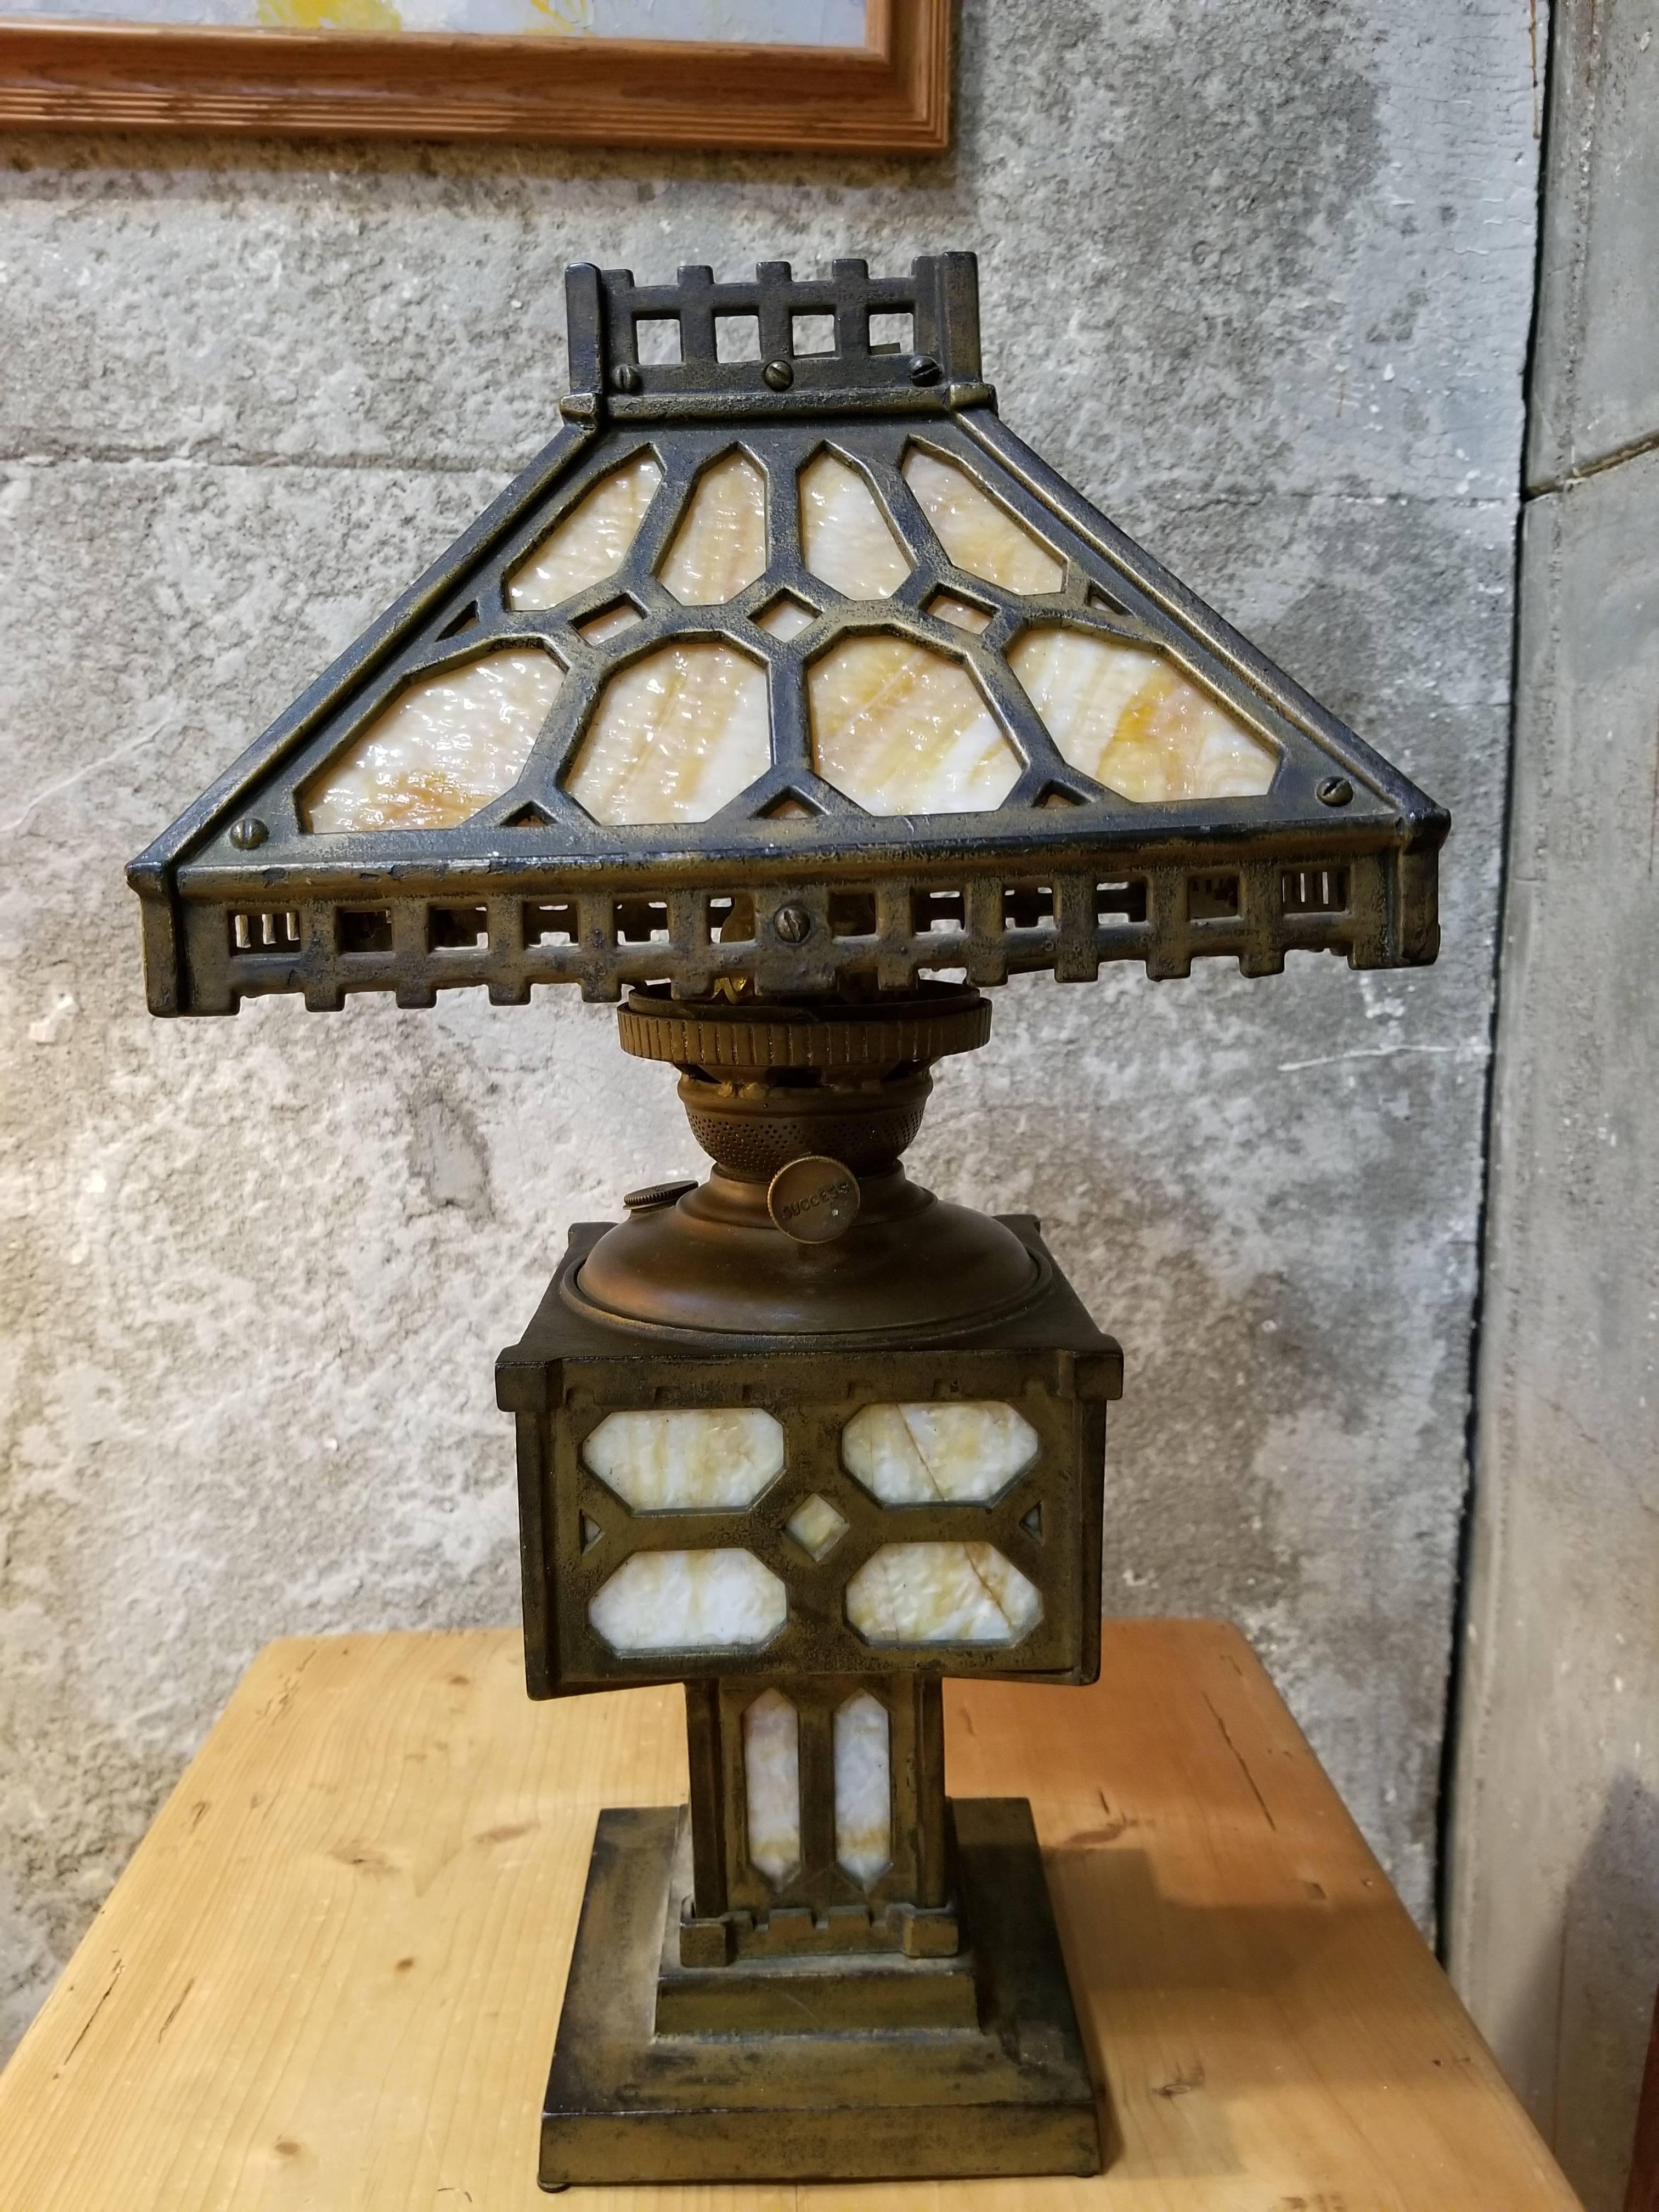 Period Arts & Crafts opaque slag glass and iron table lamp, circa 1915. Beautiful patina to original finish on cast iron frame. Original brass oil burner intact, converted to electricity circa 1930s. Several cracks to original glass panels in lower